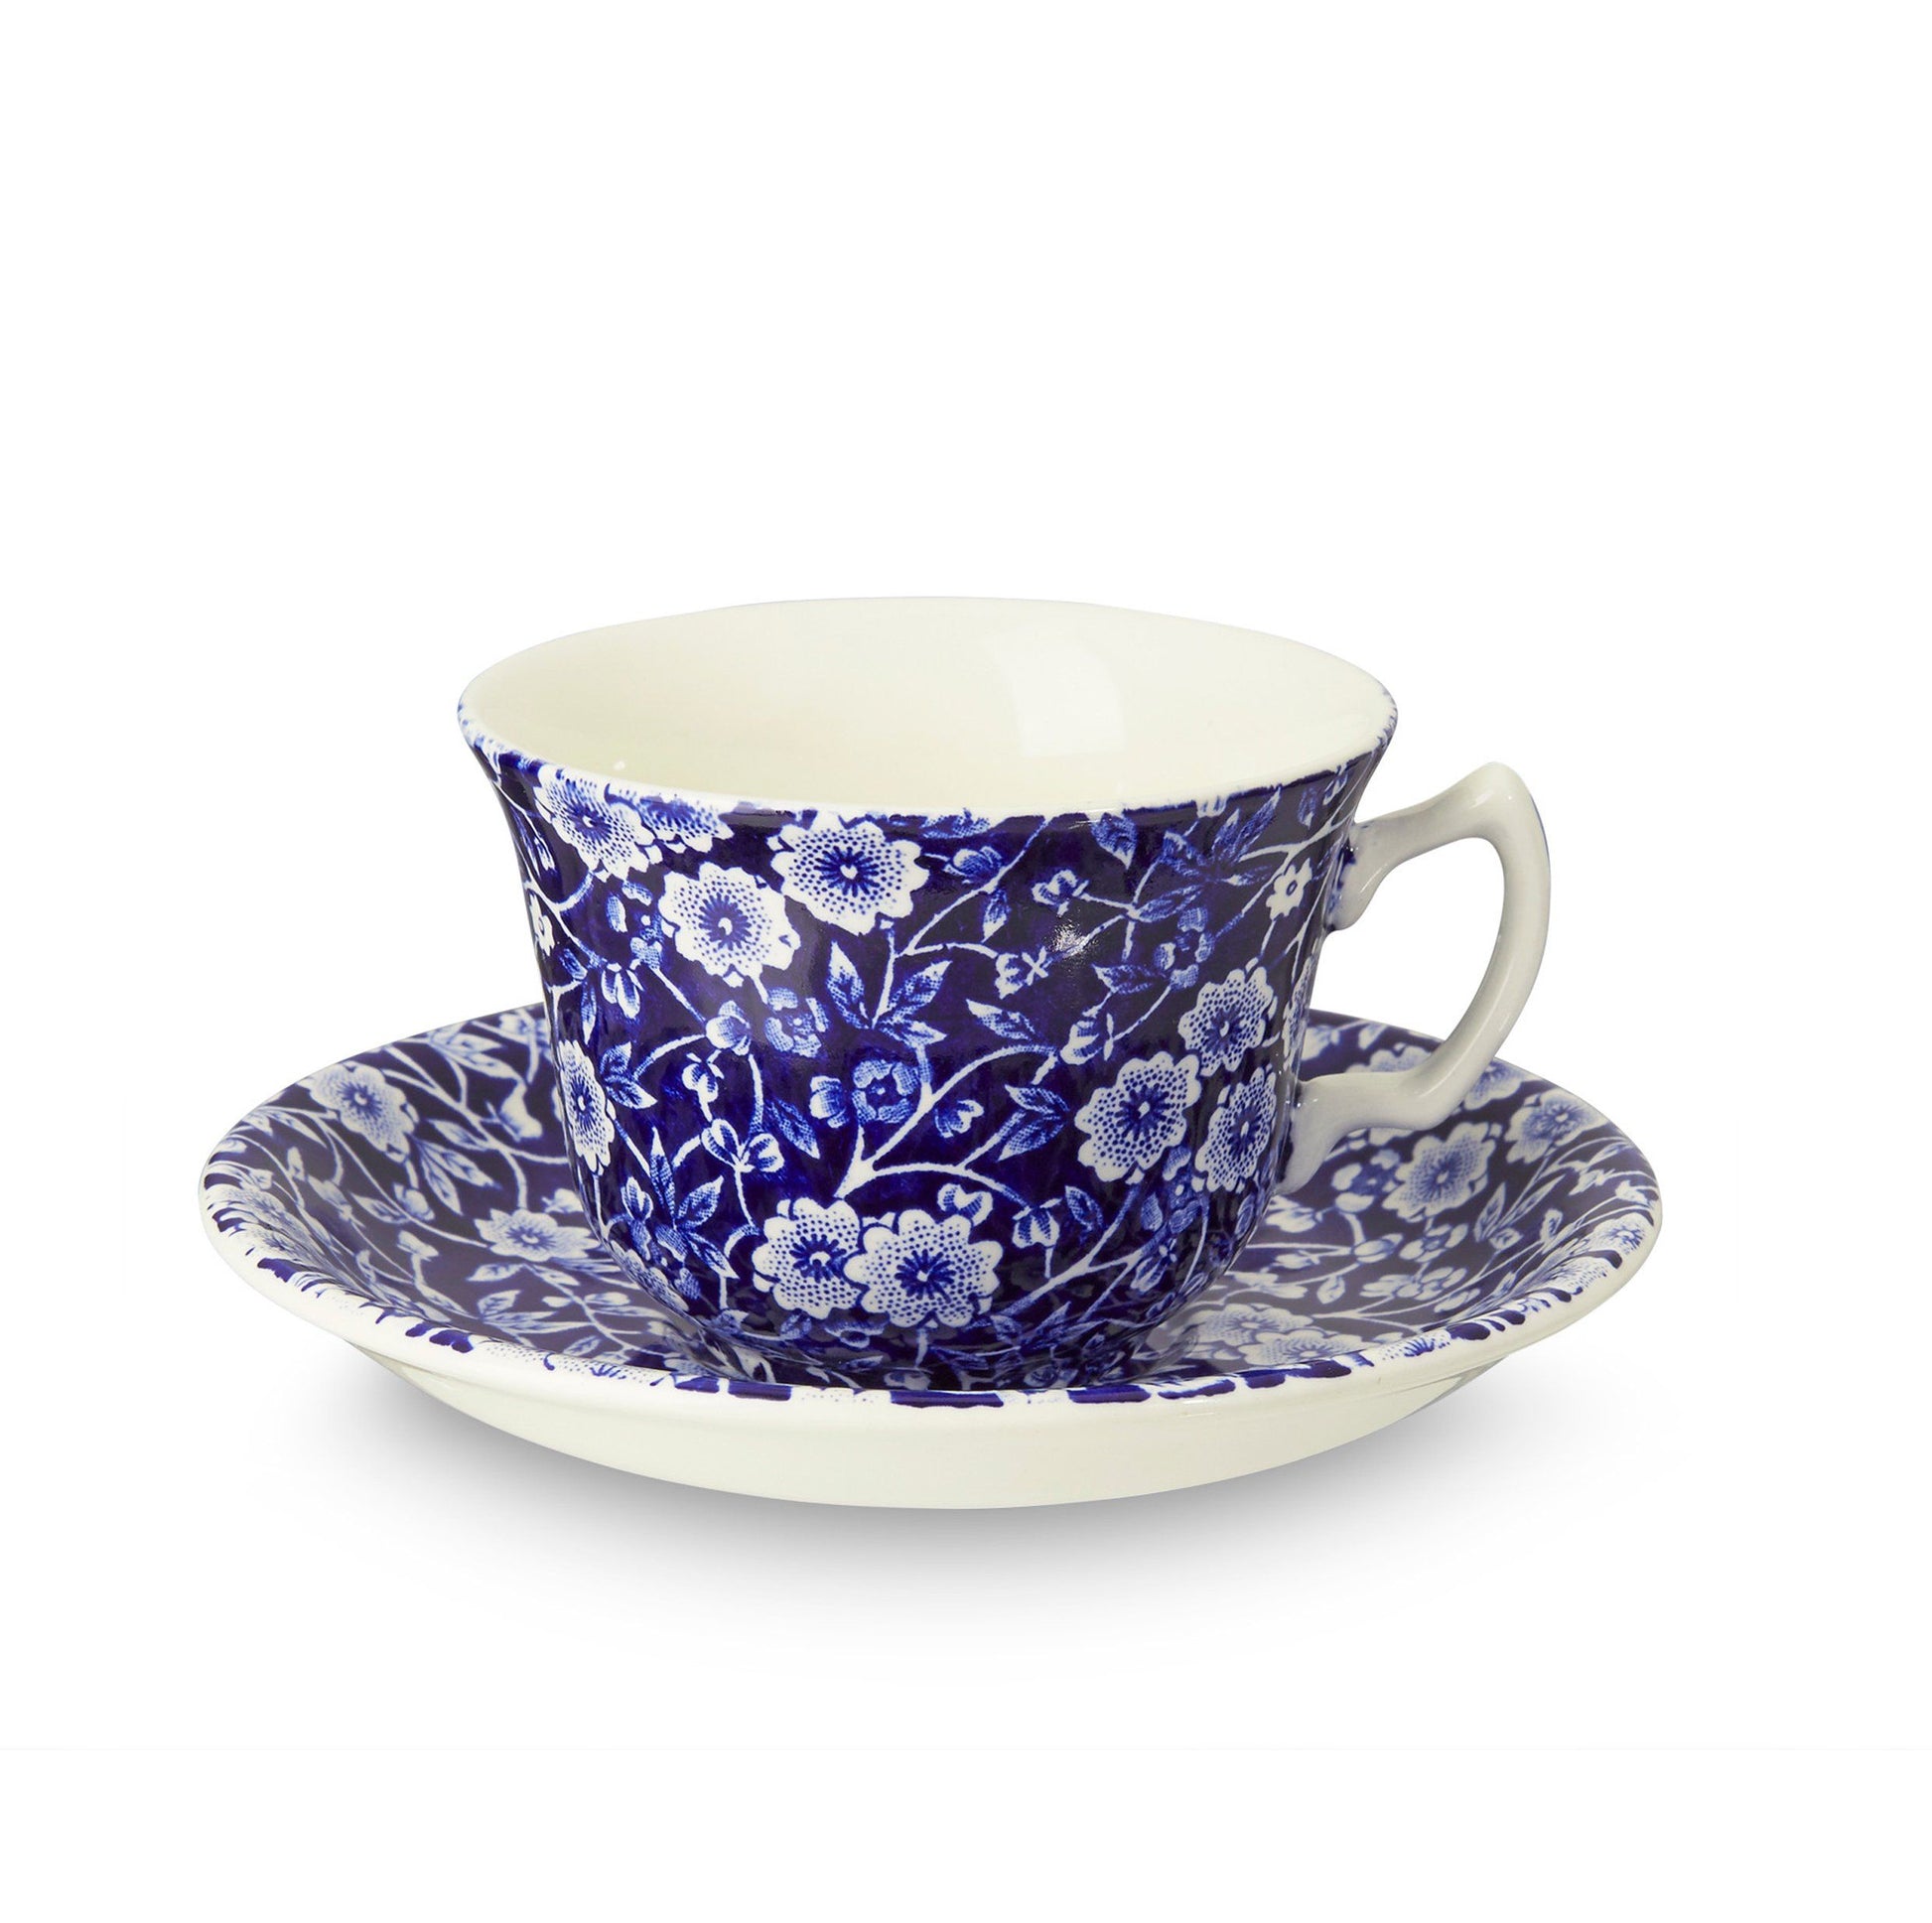 Blue Calico Tea Cup And Saucer